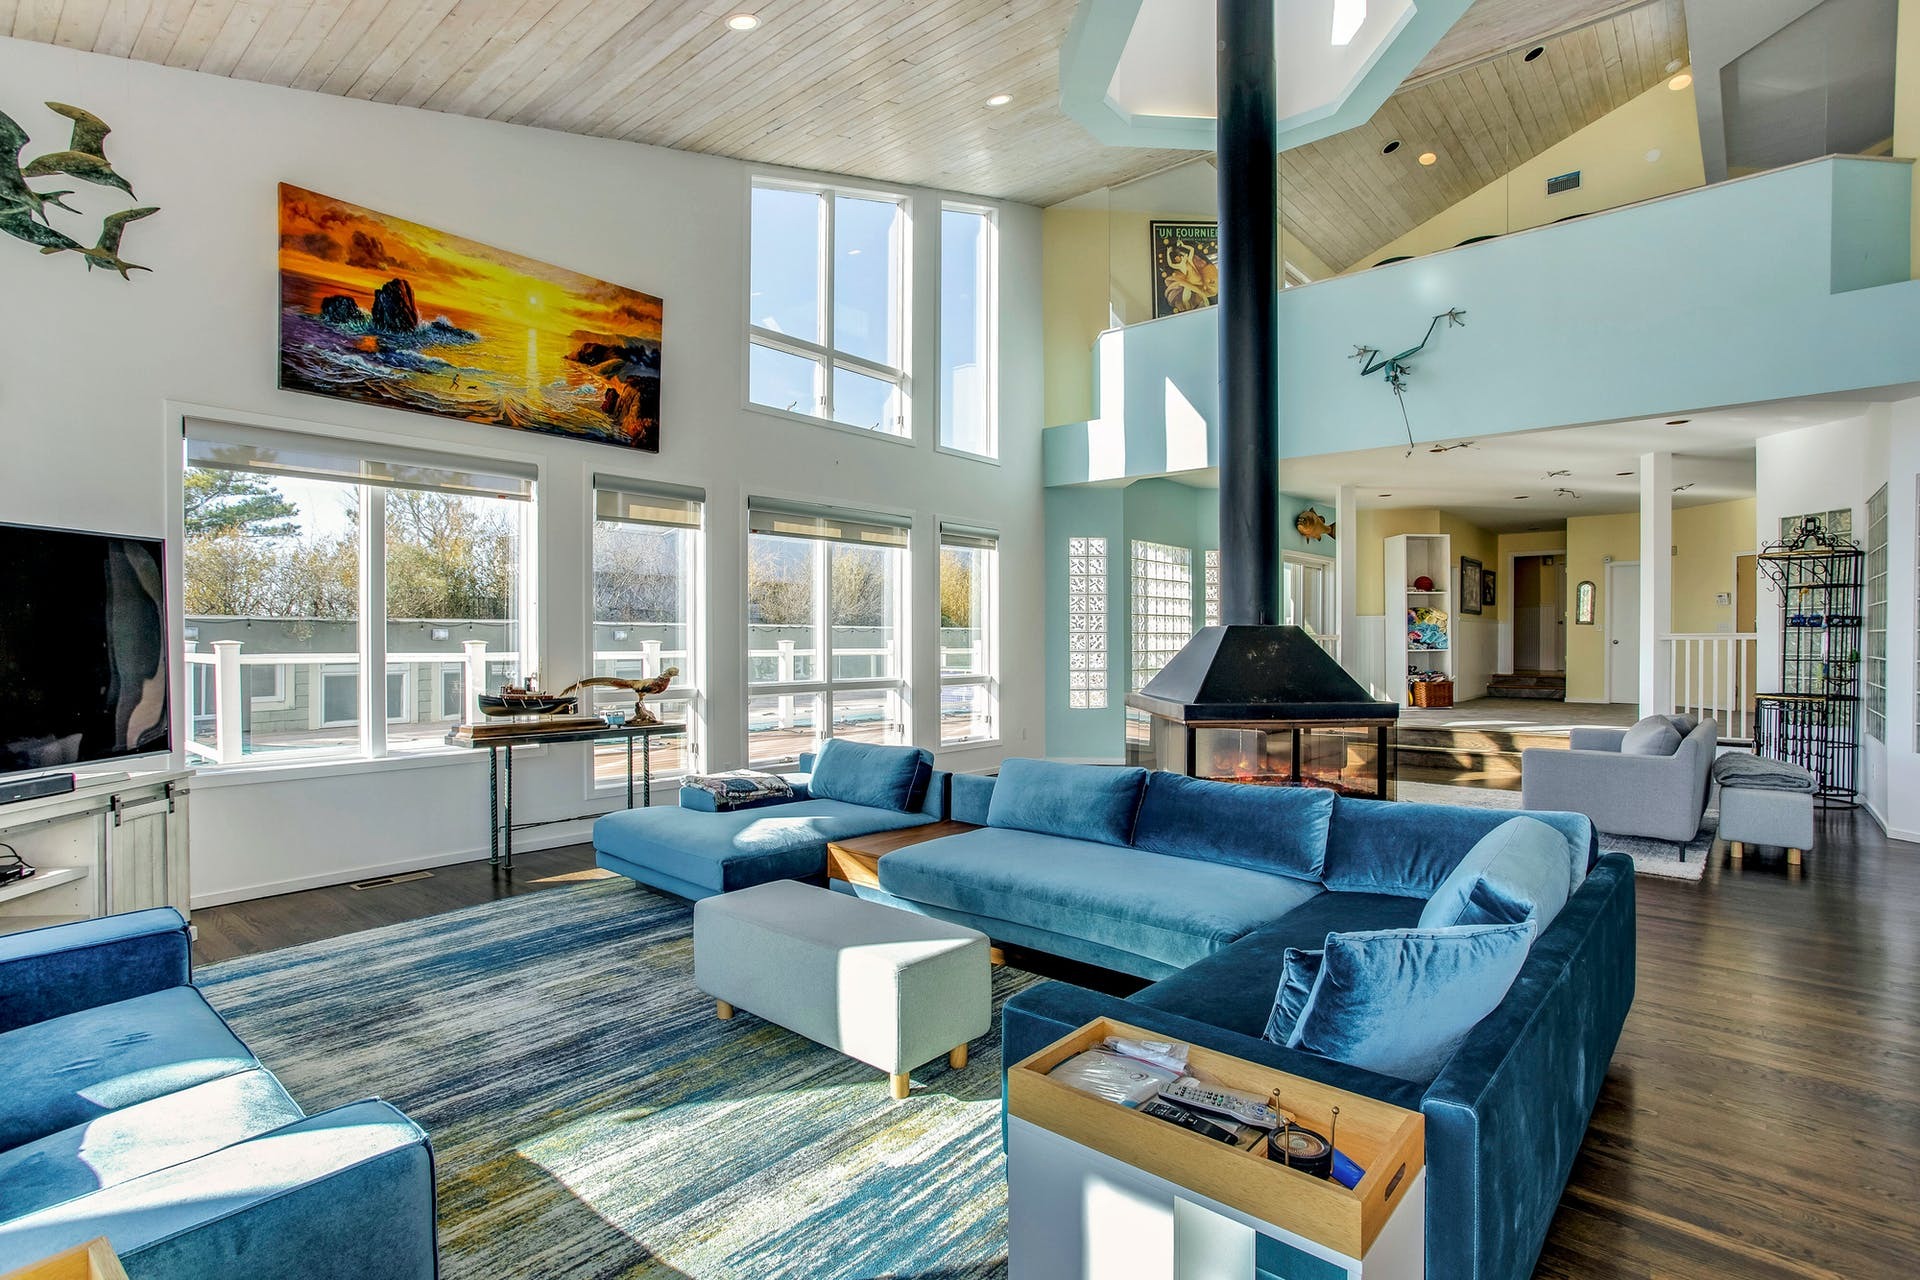 In Westhampton Beach, 339 Dune Road recently sold for $11 million.  COURTESY GIO/JUMPVISUAL